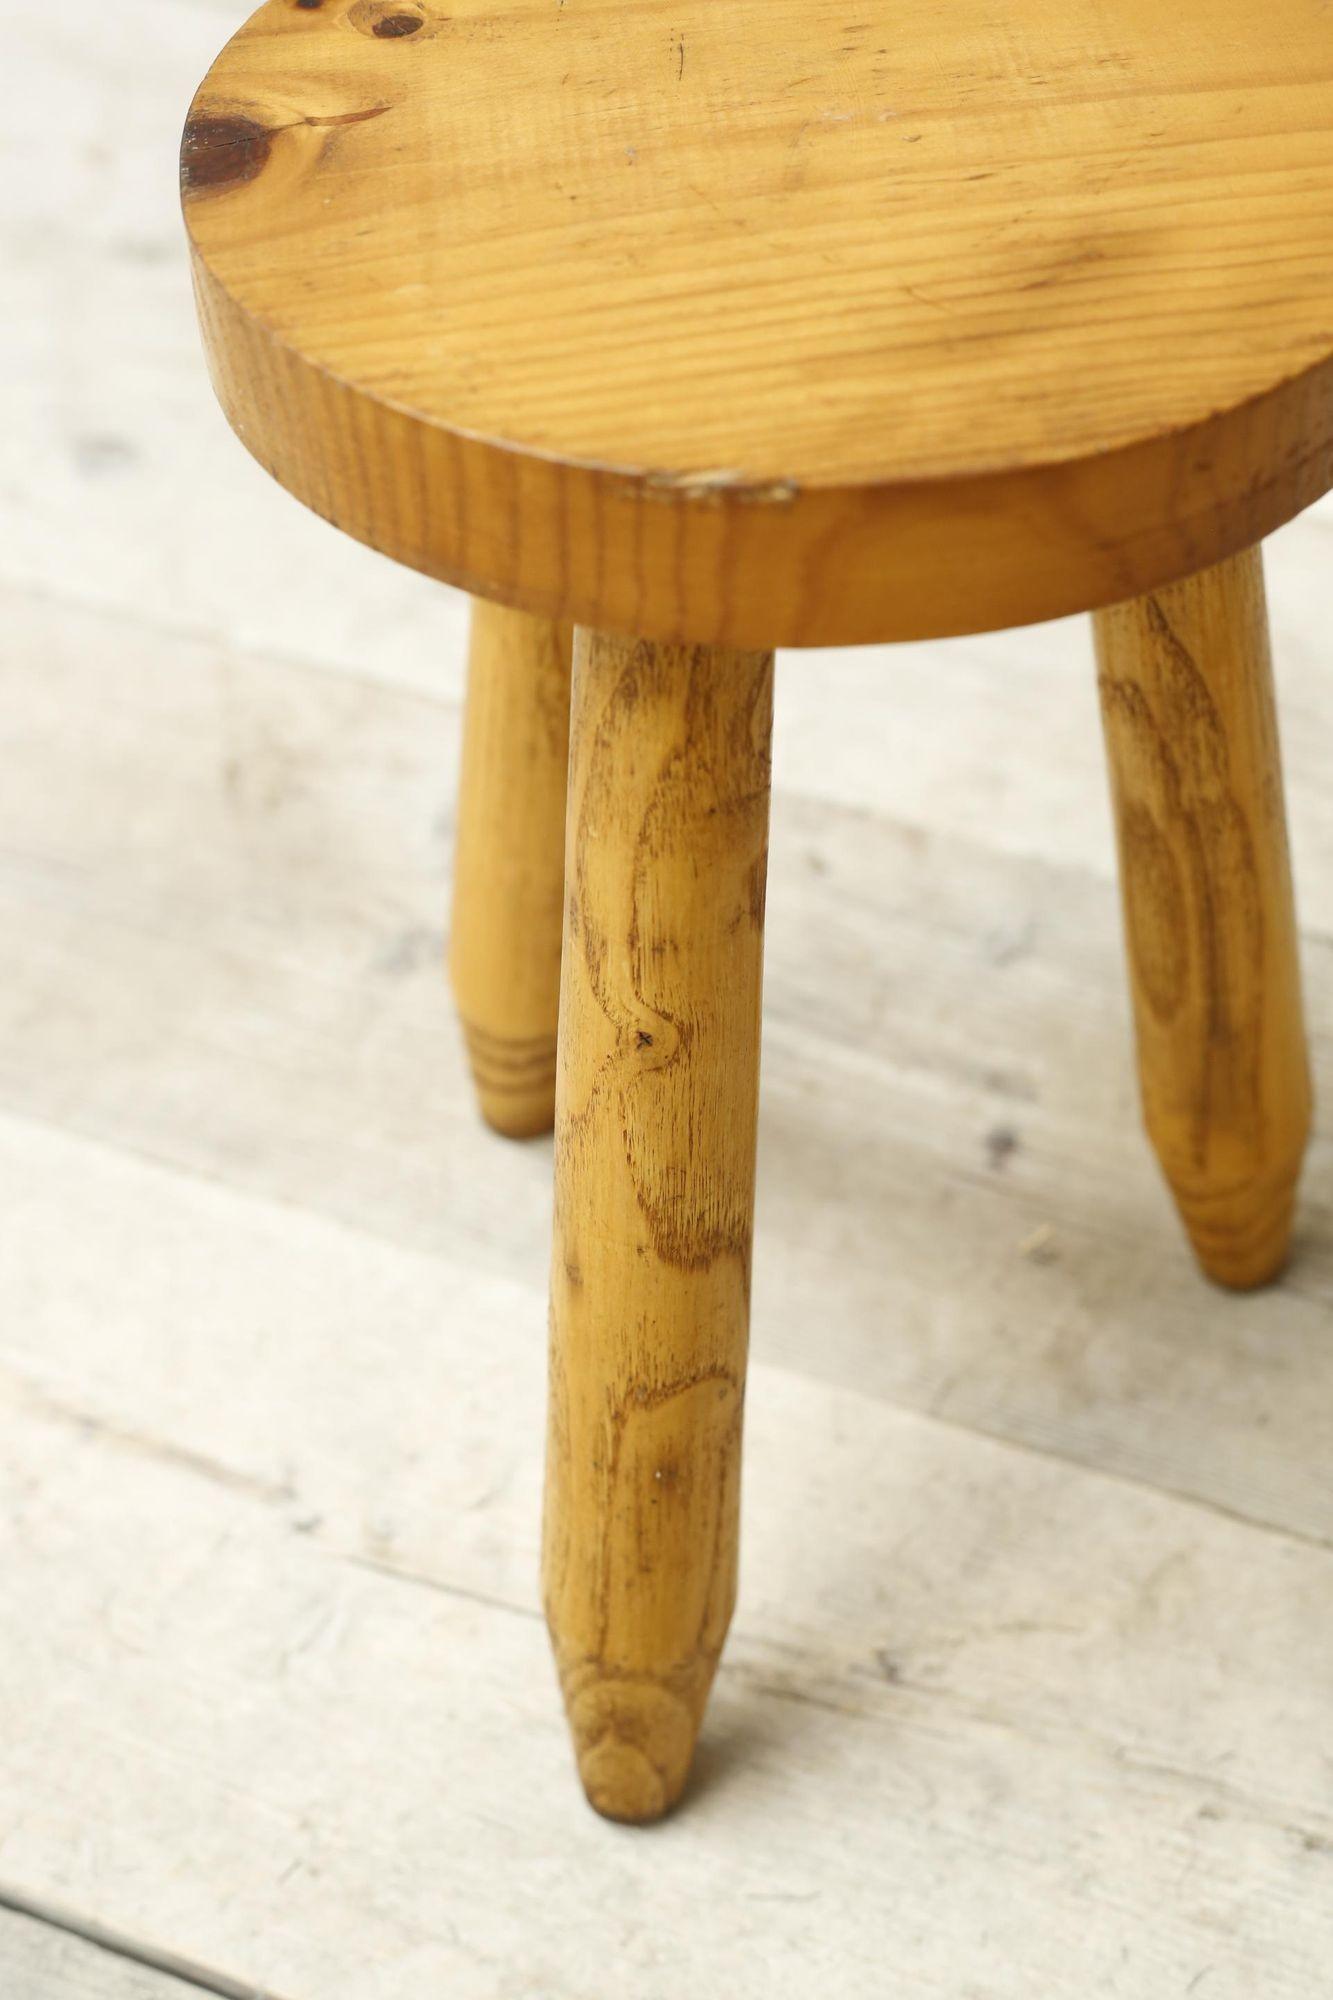 This is a very stylish small side table / stool made from pine. Circular top and tapered legs with great patina and colour. Ideal for use by the side of a chair or your bath for all of your lotions and potions.
Height 38cm Diameter of legs 26cm